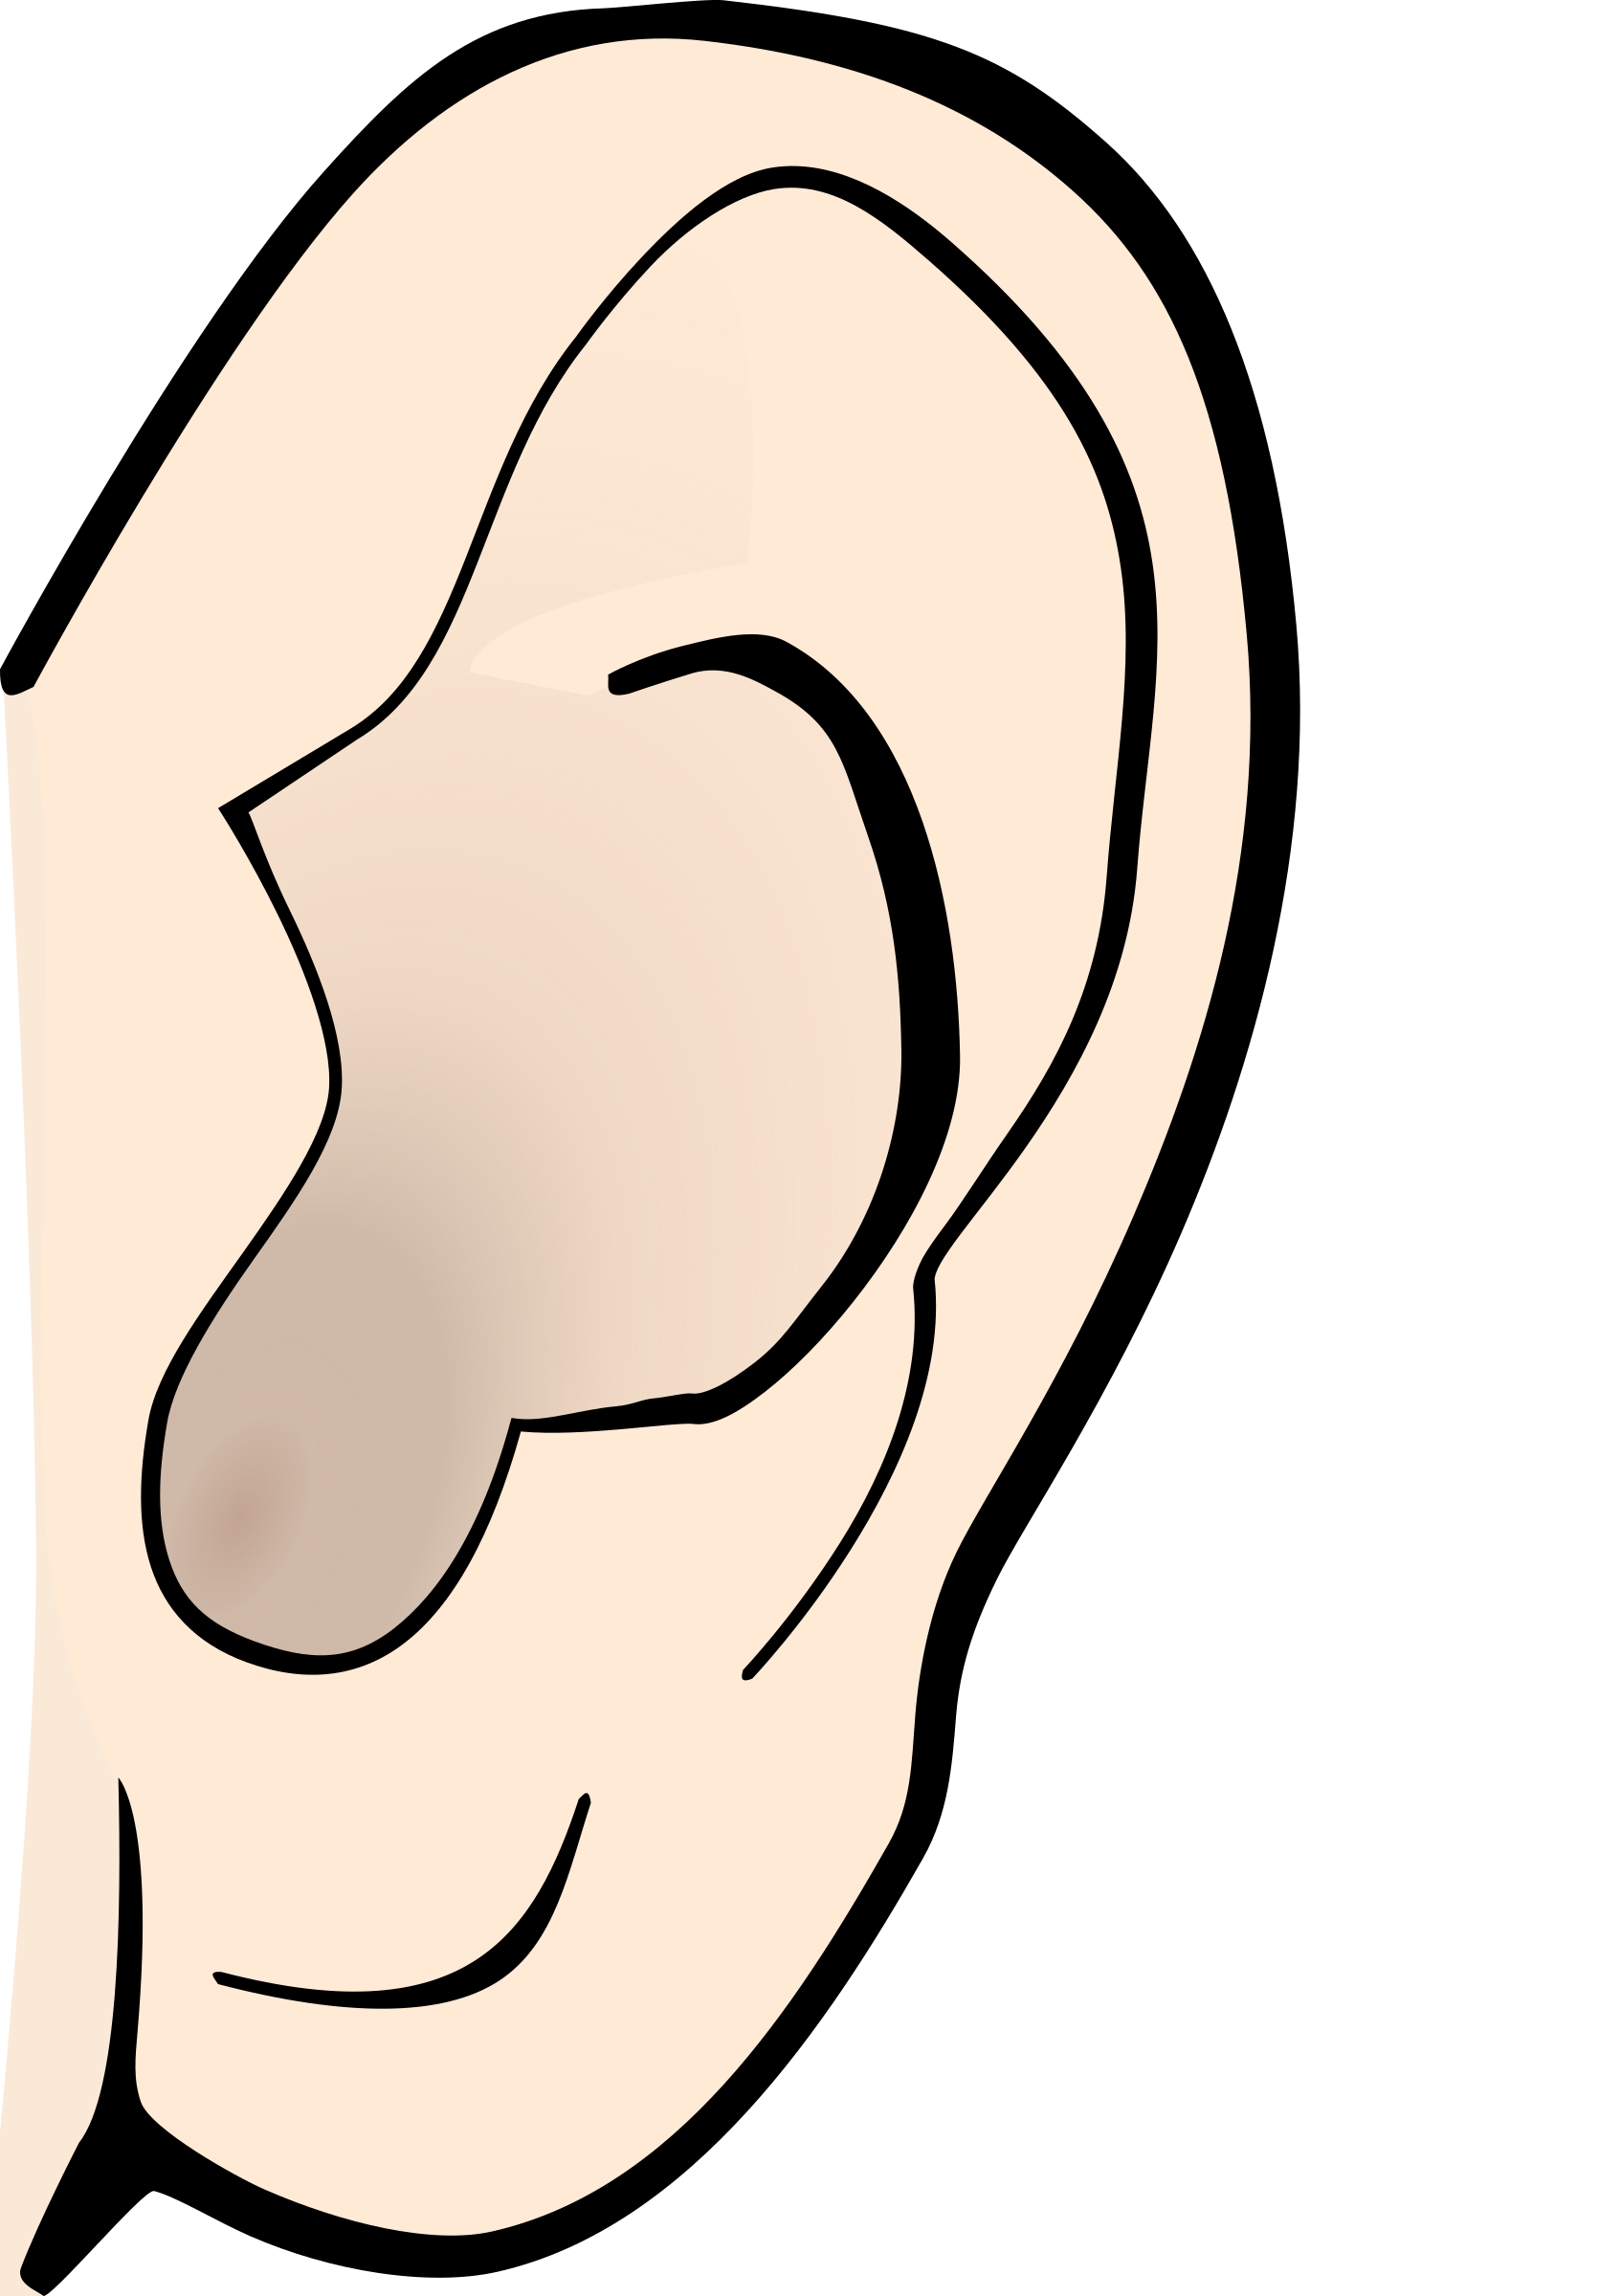 sense of hearing clipart - Clipground